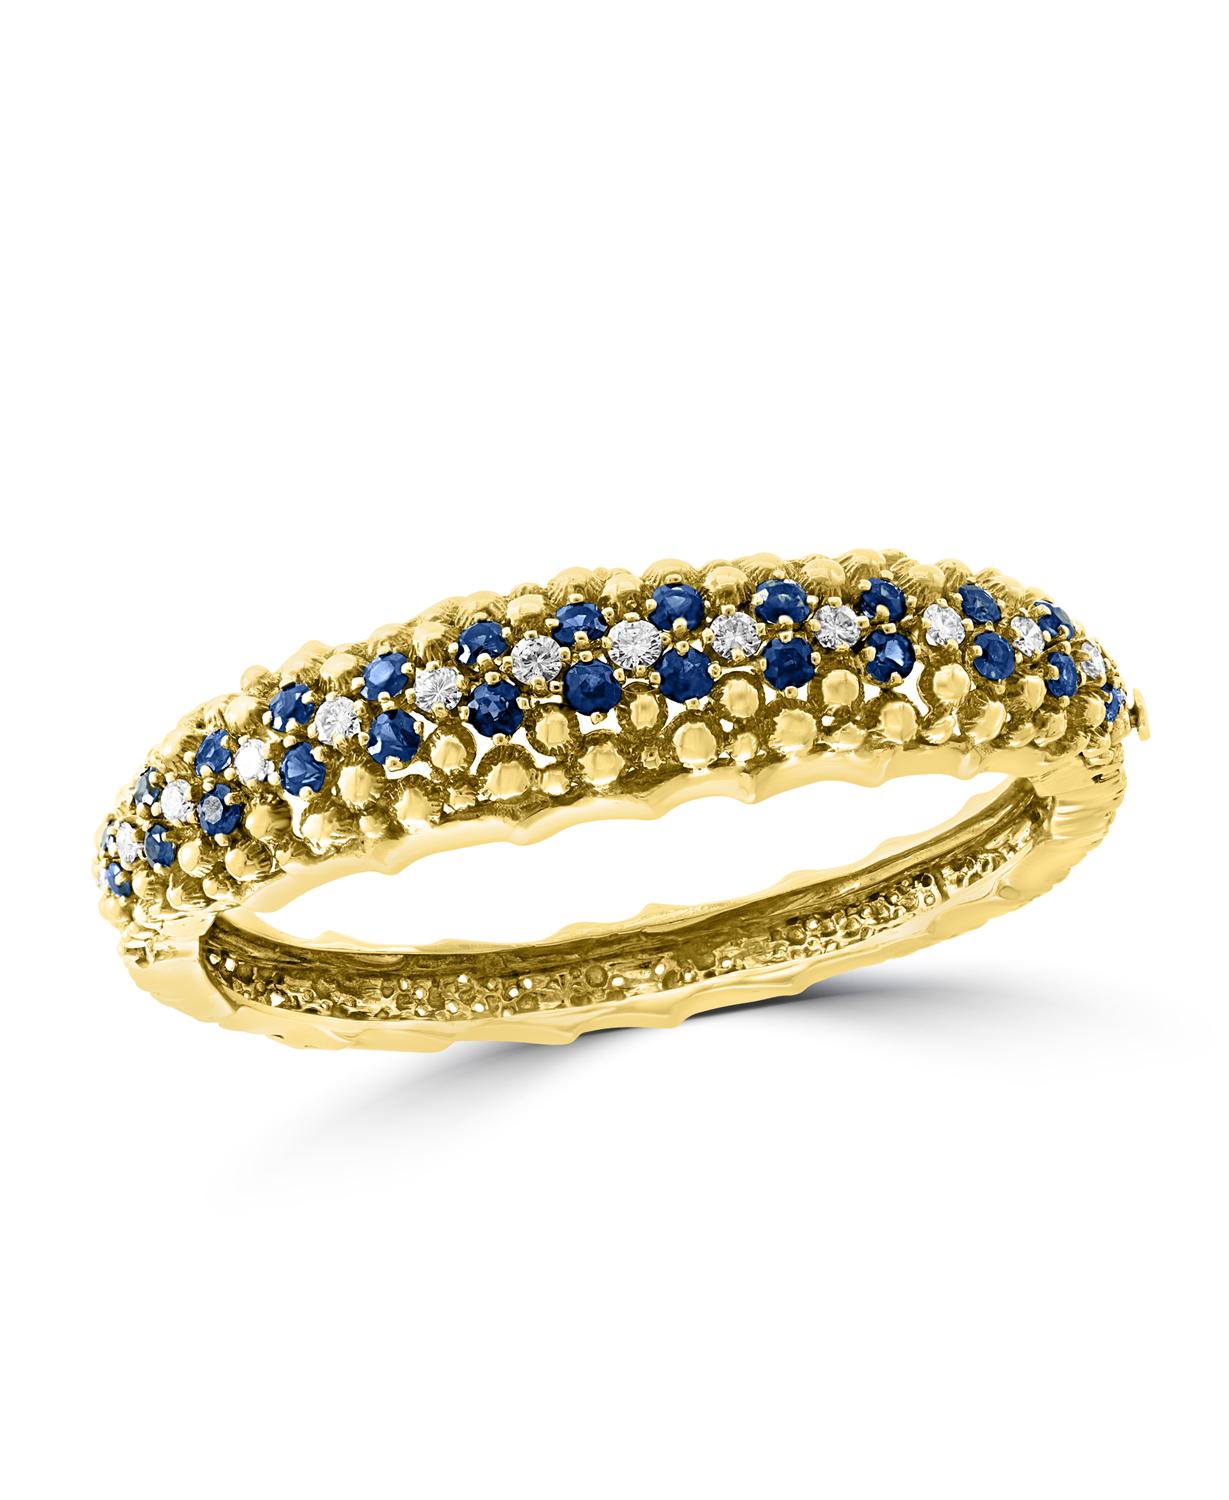 5 Carat Sapphire & 1. 5 Carat Diamond Bangle Bracelet In 18 Karat Yellow Gold 
A spectacular jewelry piece. This exceptional Bangle bracelet has 26 round blue sapphire stone . Weight of the Sapphire is approximately 5 carats. Alternating the